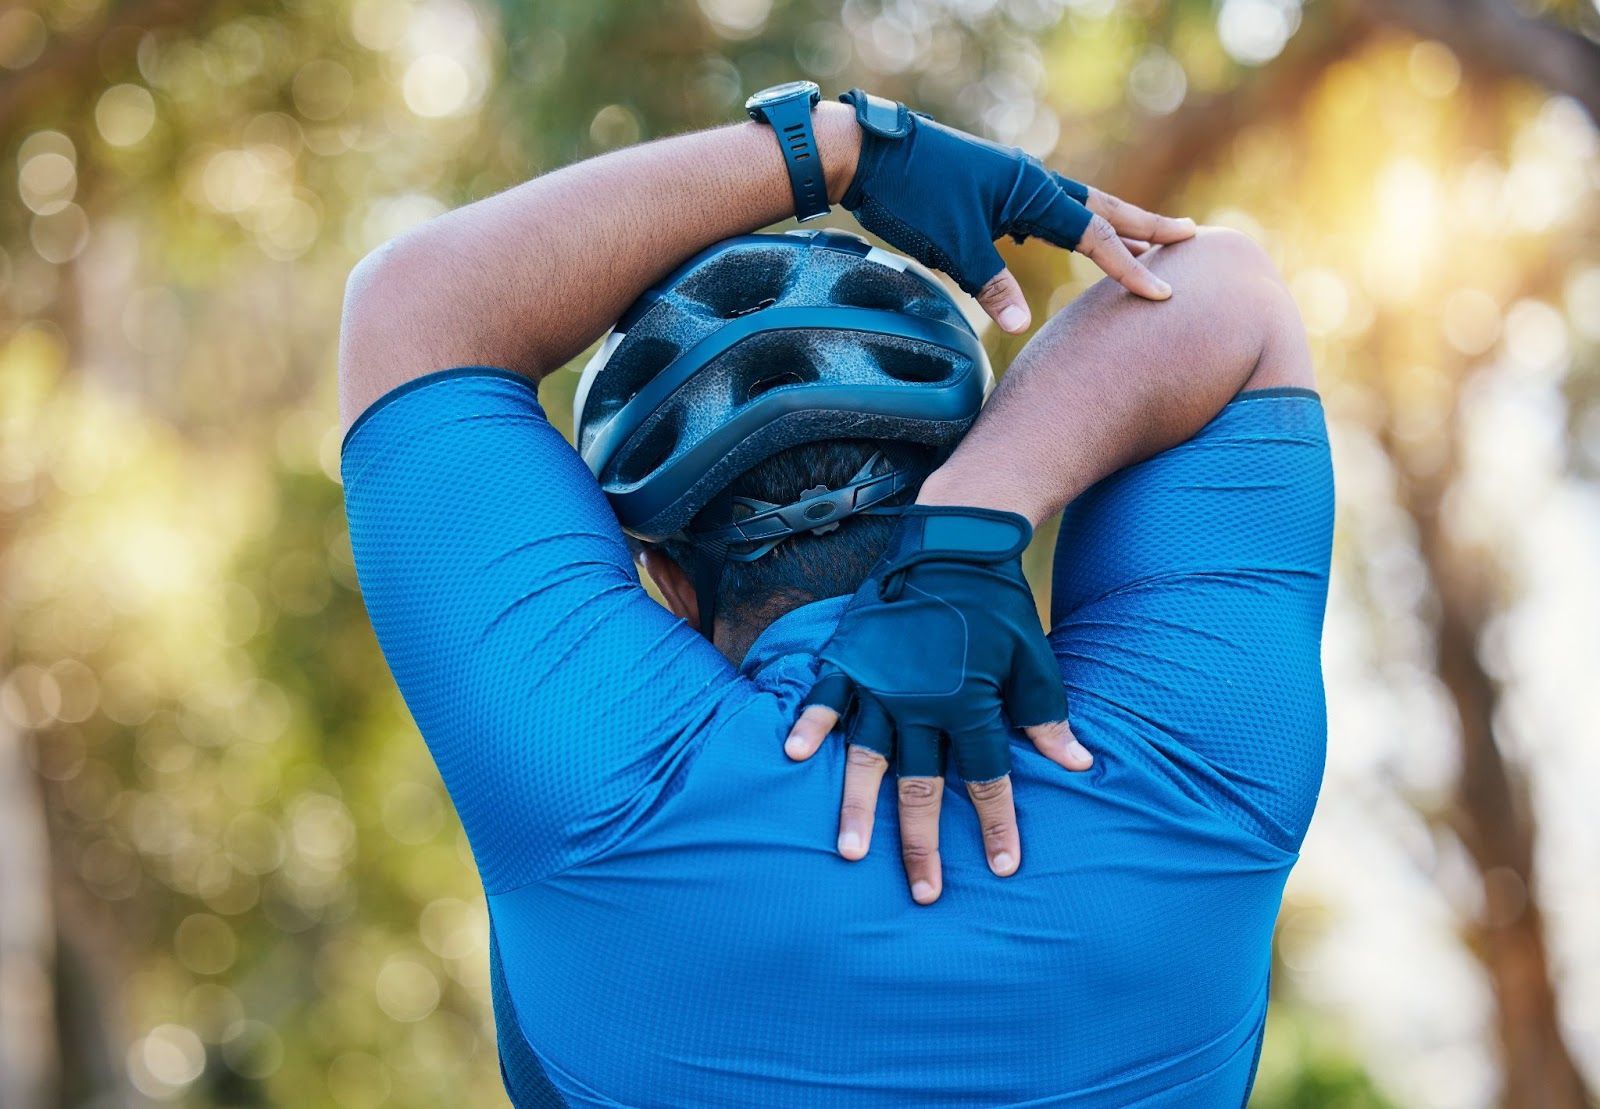 A cyclist wearing blue attire stretches his arms amidst nature.
